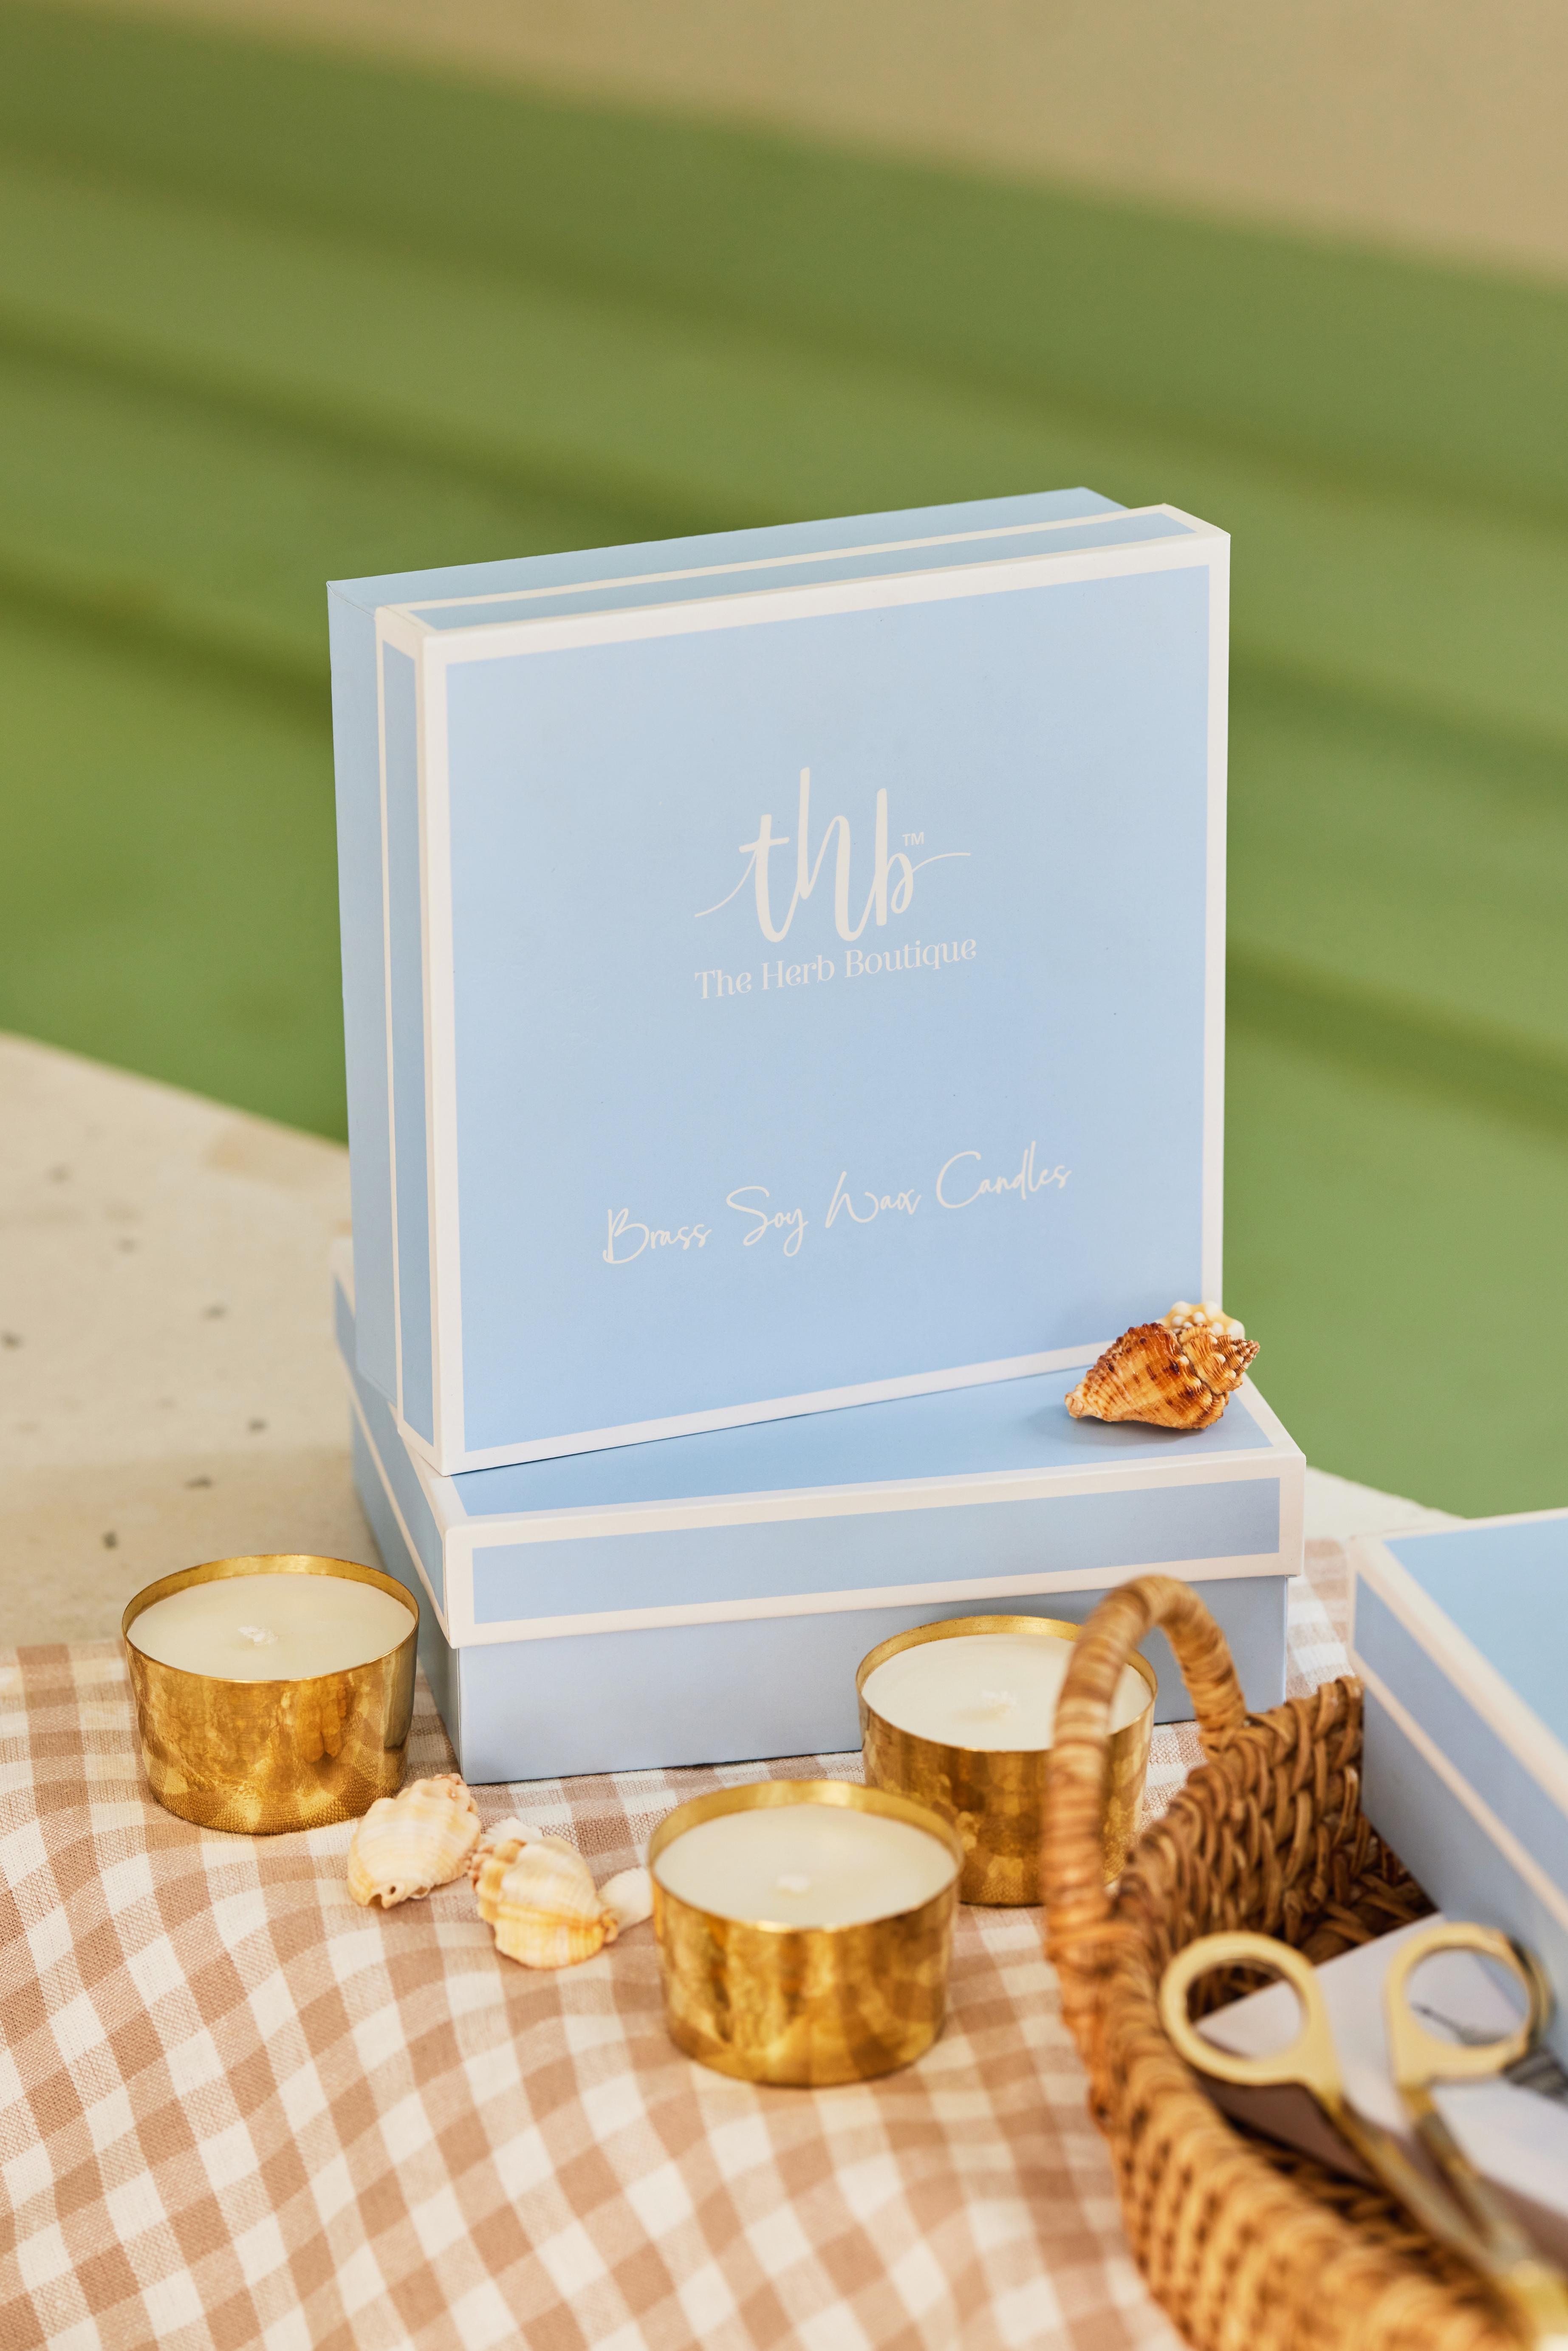 The Herb Boutique Salt & Sea Candle Gift Pack  (set of 4)